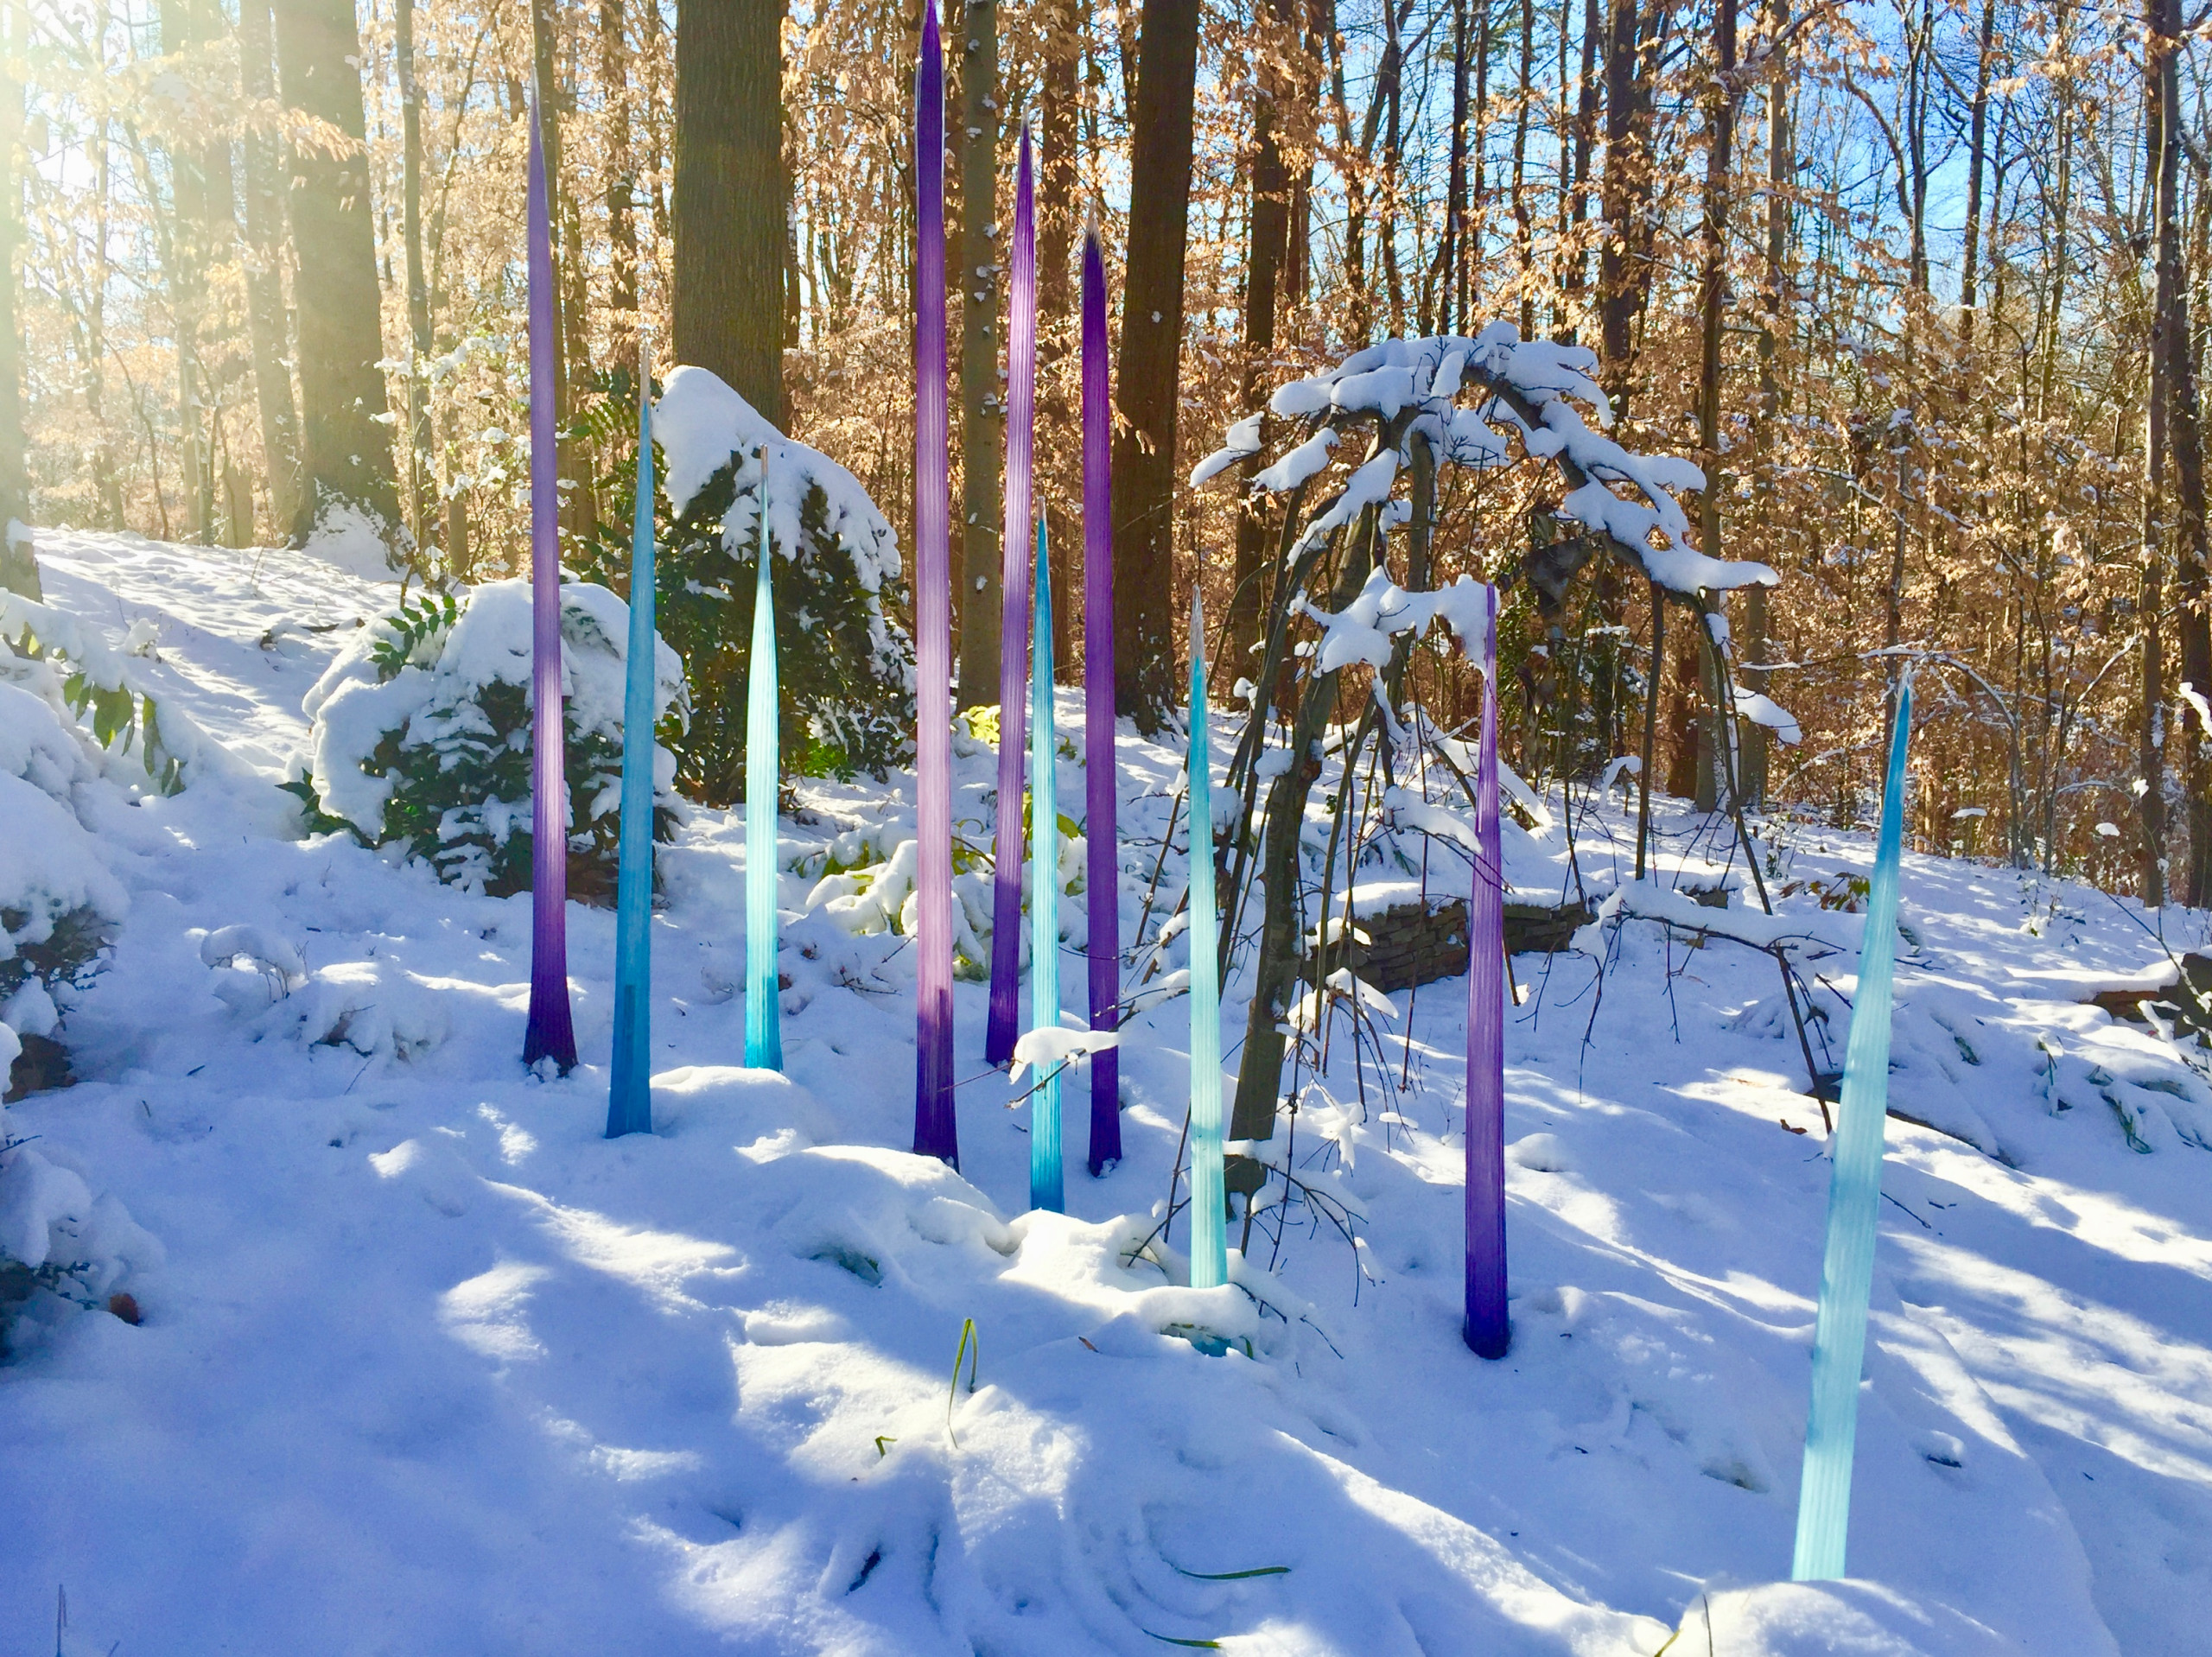 Glass spears in the snow.